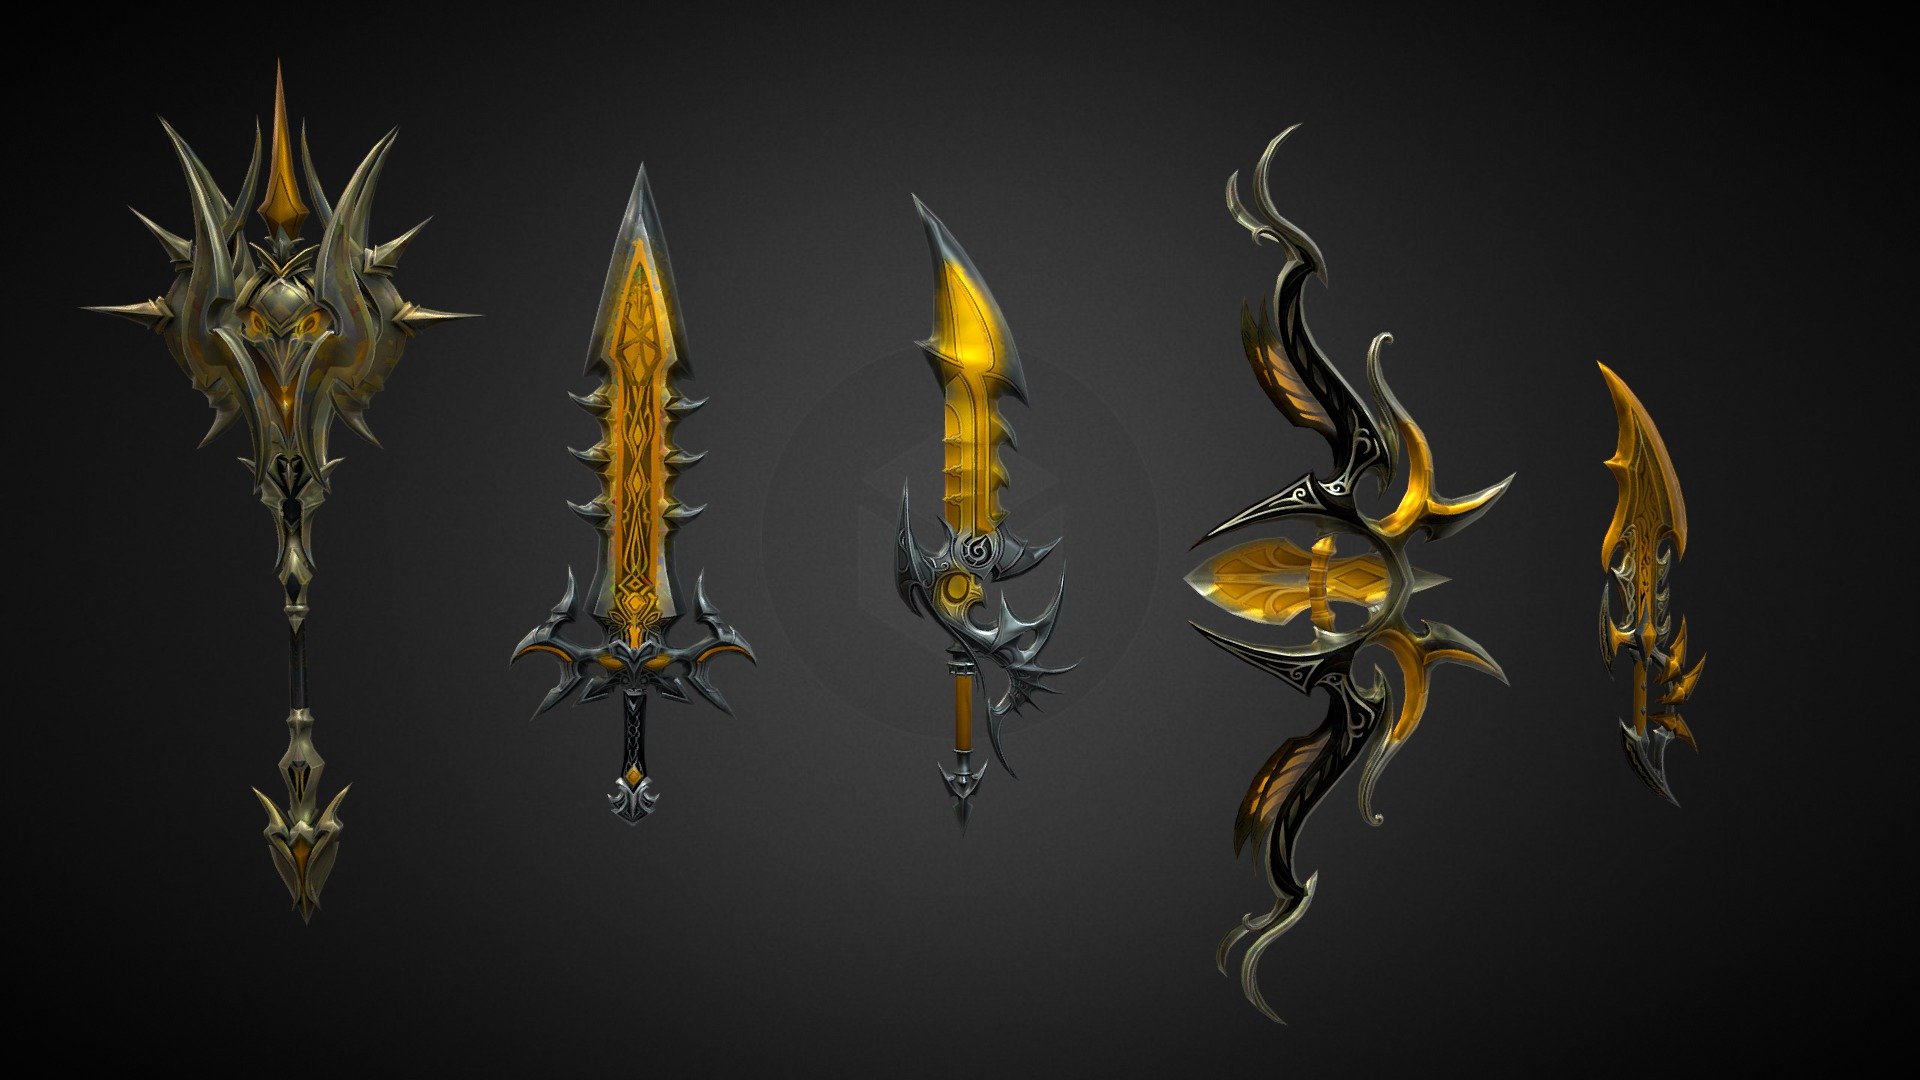 FREE The weapons shown in this pack are free to download from My Unity store here Link

An upcoming publication will feature an extensive assortment of weapons, including swords, axes, bows, staffs, daggers, hammers, firearms, magic wands, shields, fans, and bells. This comprehensive collection will soon be available for exploration and use 3d model